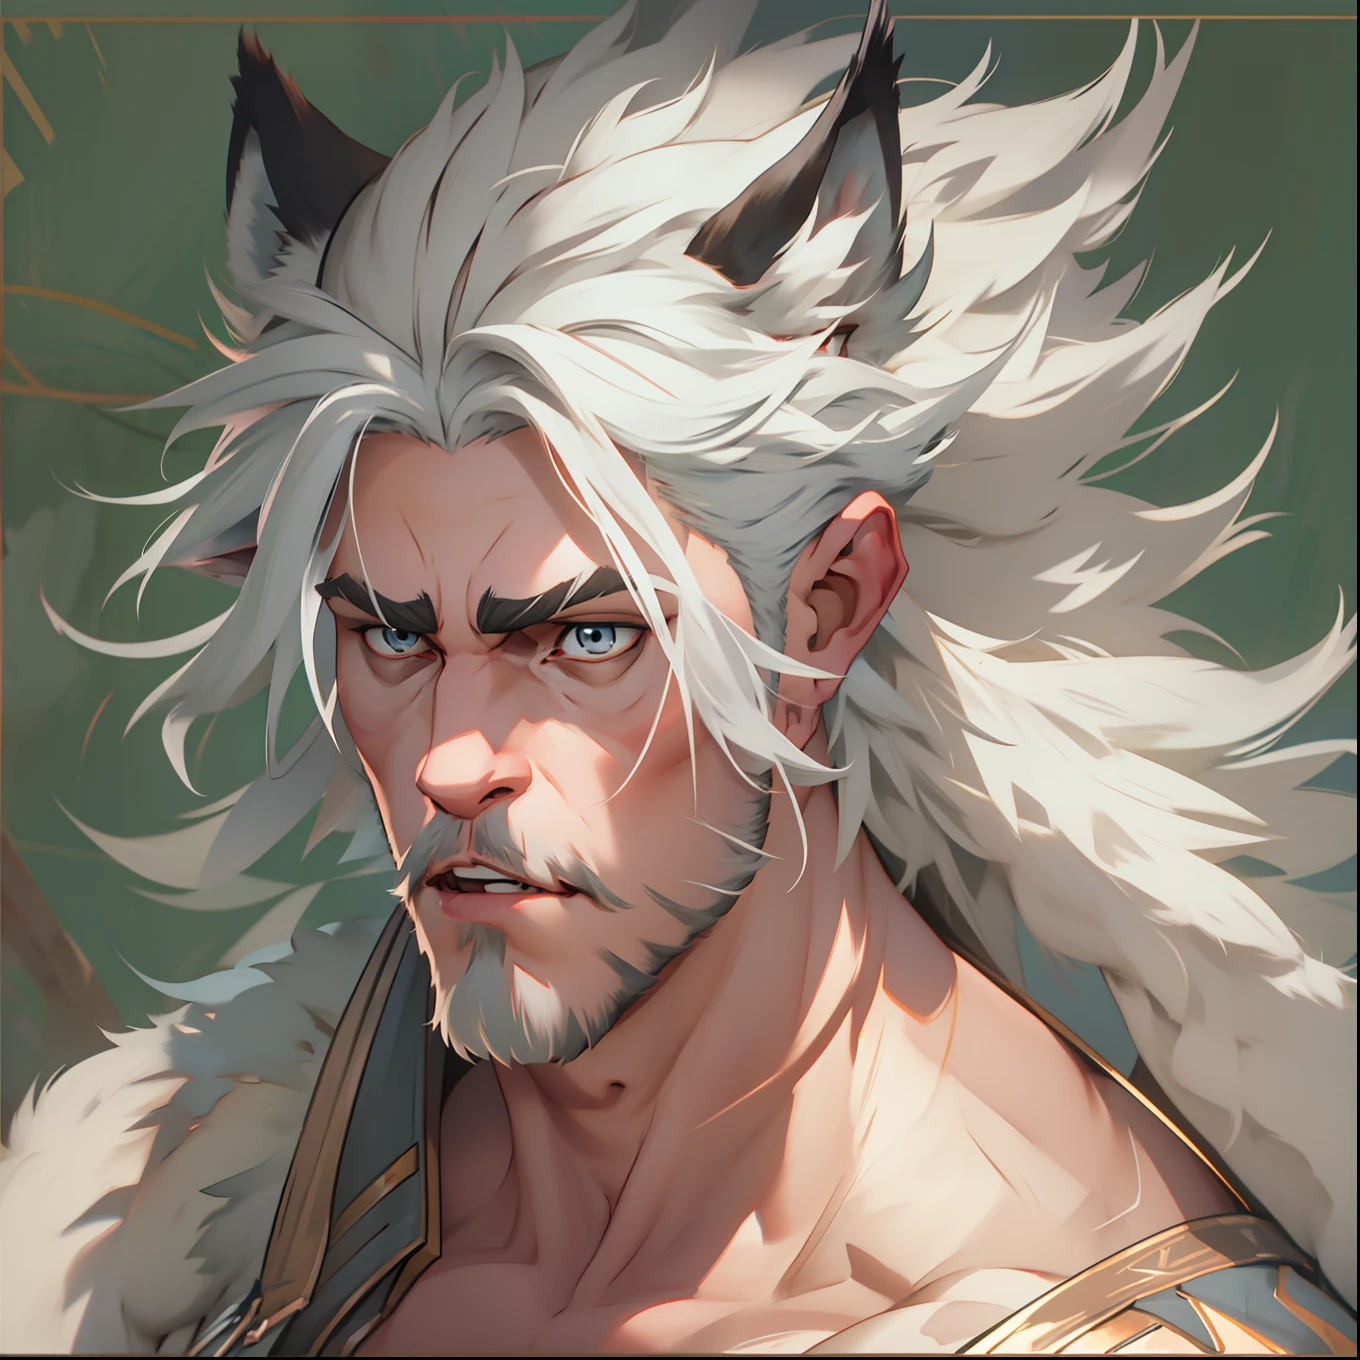 muscular Male with light beard, flowing white hair, has wolf ears, has wolf tail, shirtless, playful, solo, alone, has goofy look on his face, himbo